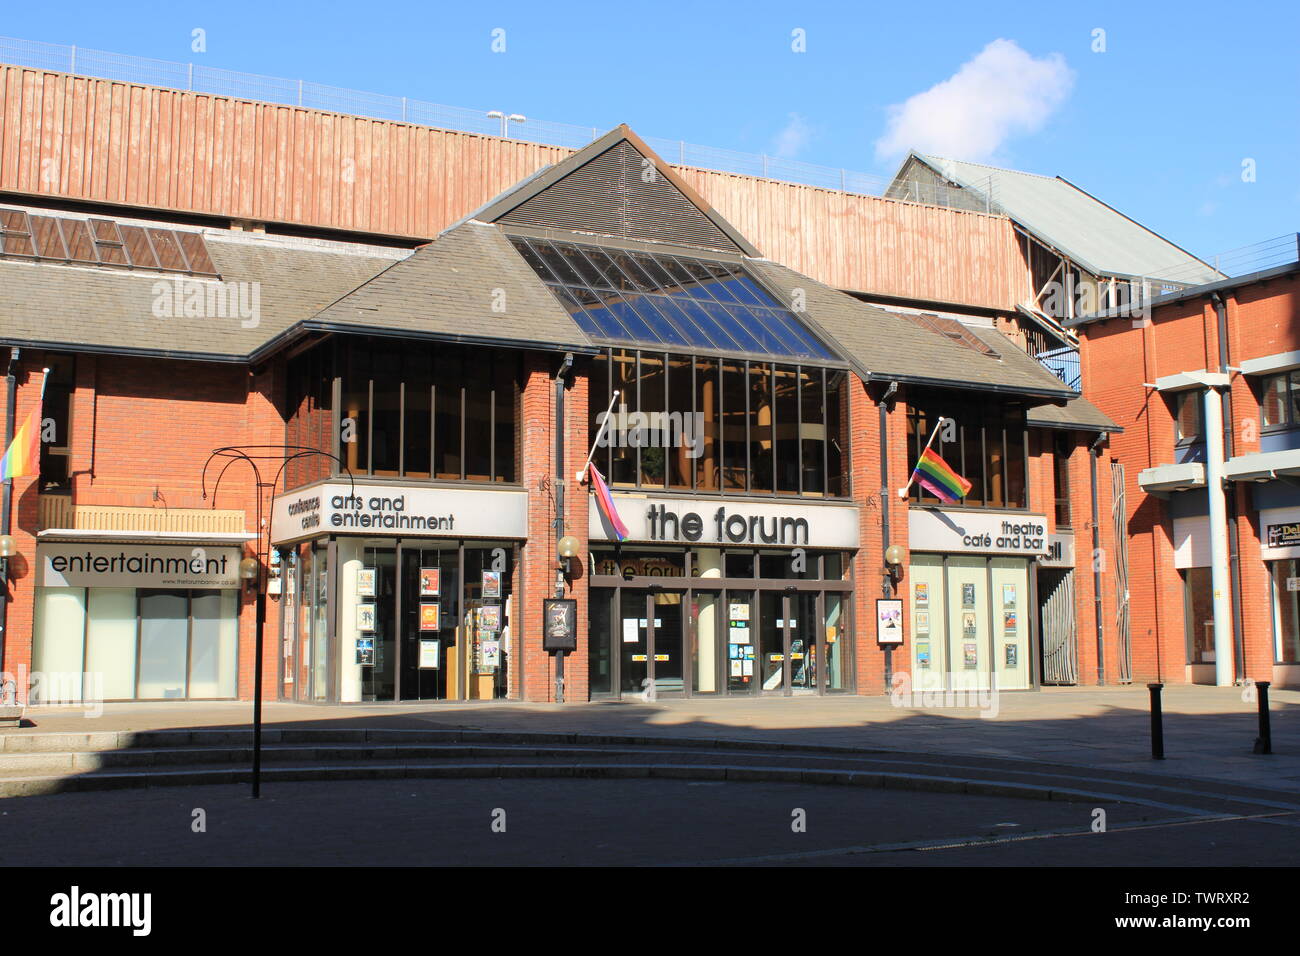 UK Barrow-In-Furness, Cumbria. The Forum Arts and Entertainment Centre. Stock Photo